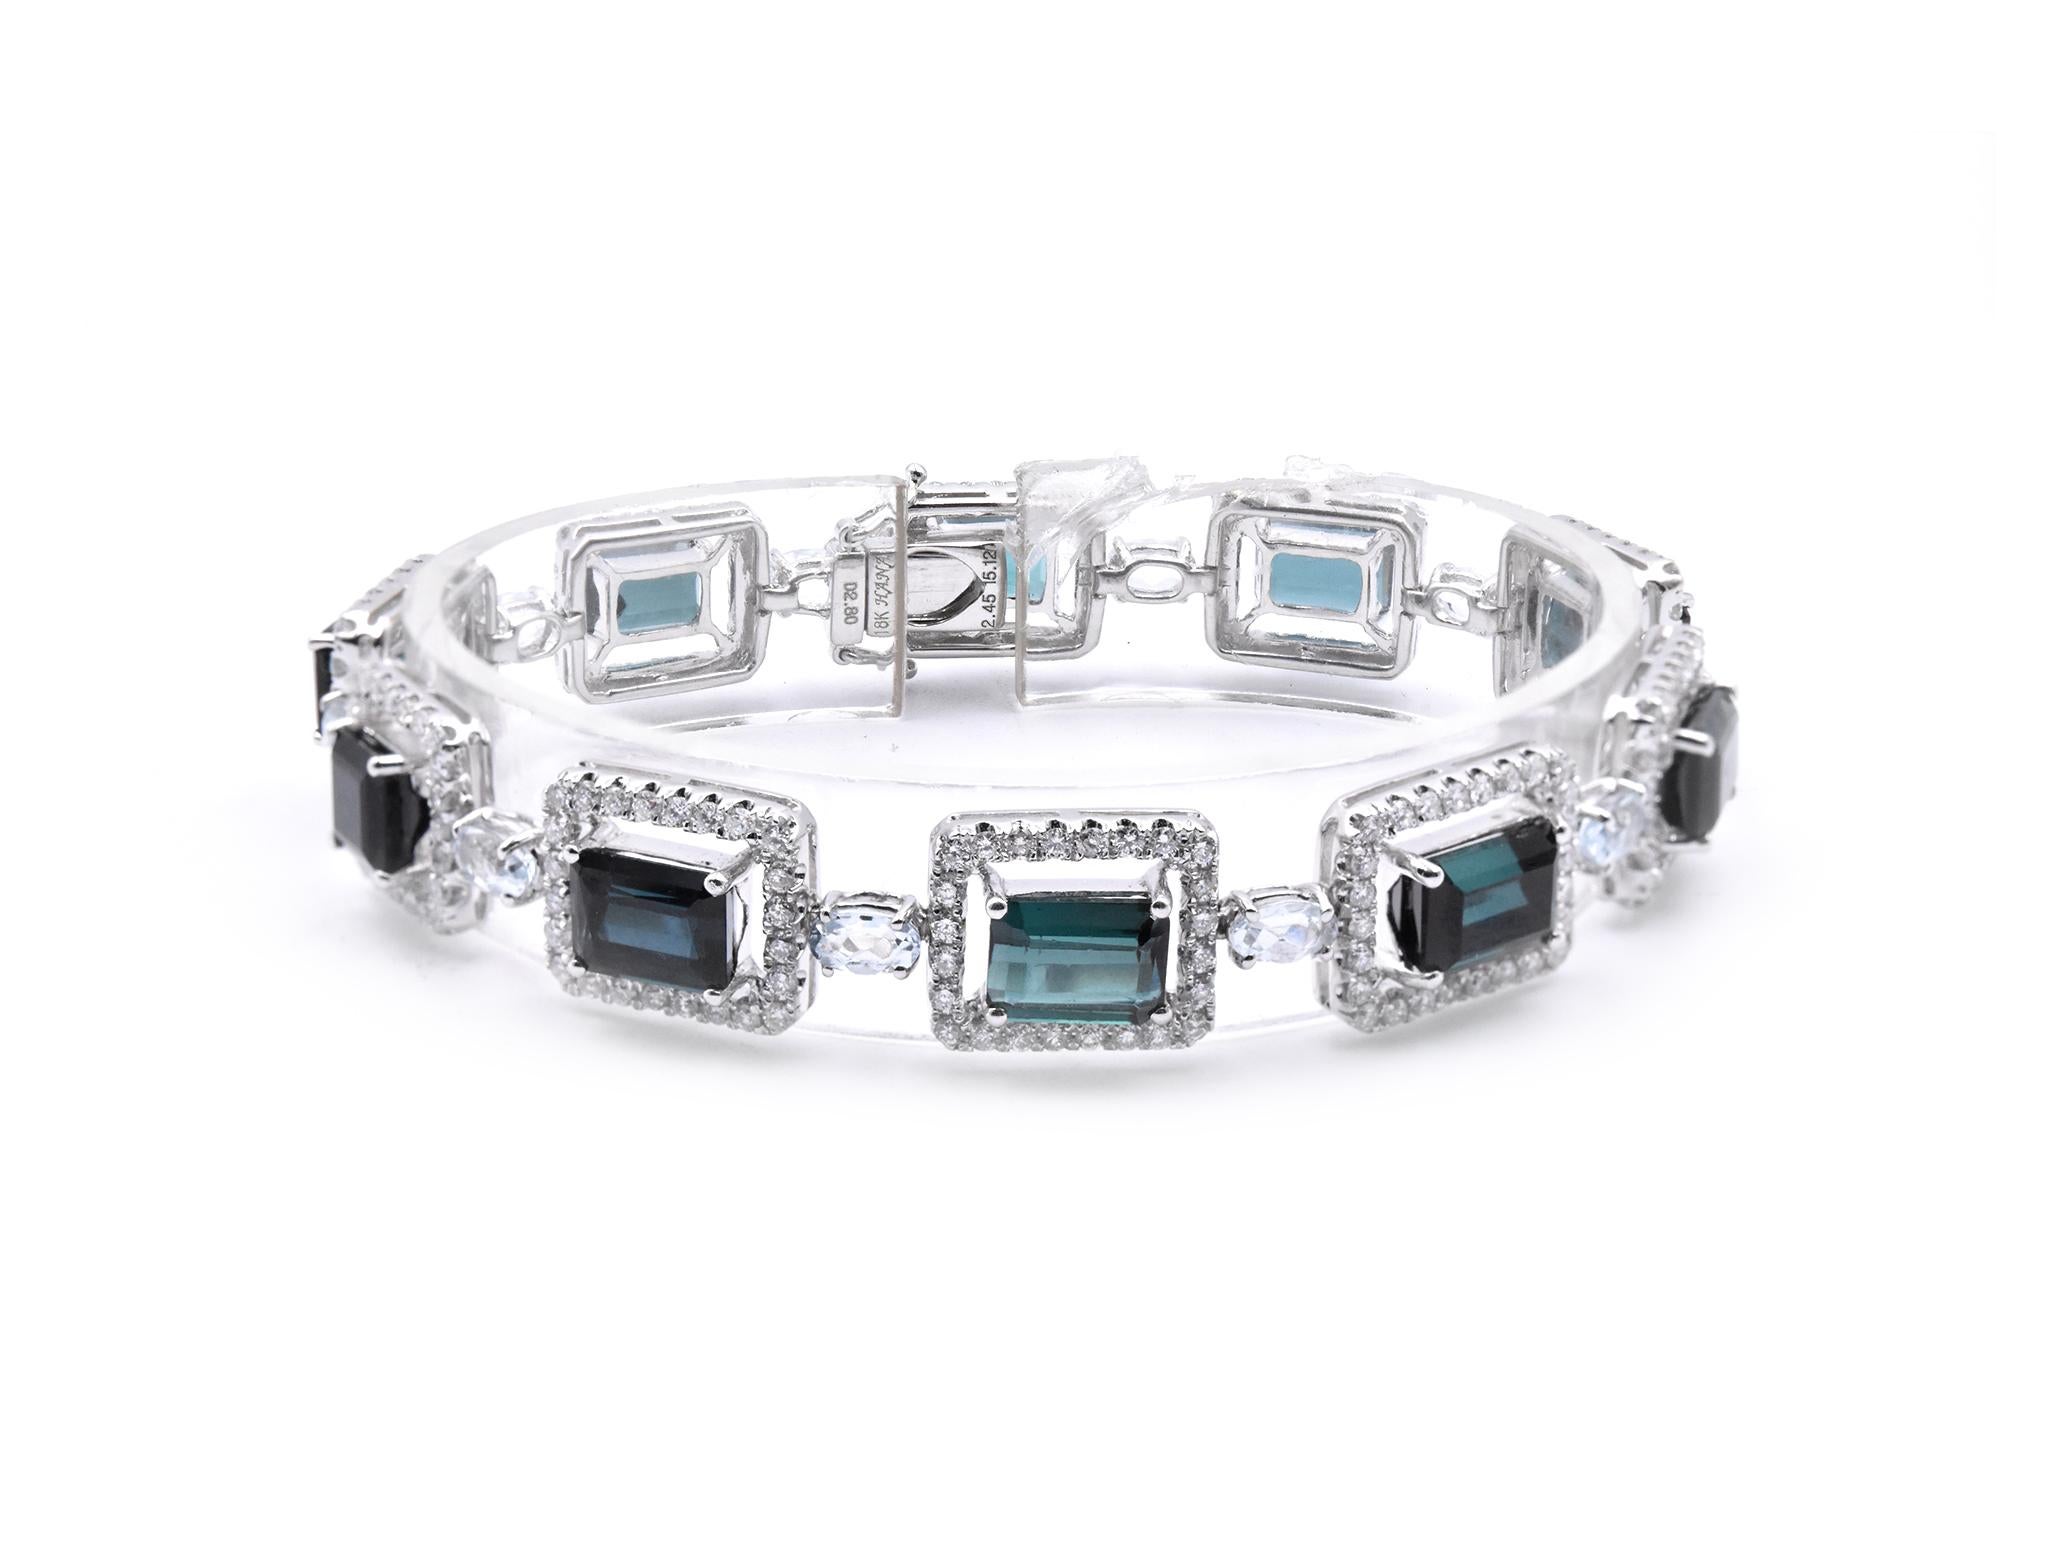 Designer: custom
Material: 18k white gold
Diamond: 234 round brilliant cut = 2.34cttw
Color: G
Clarity: VS
Aquamarine: 10 oval cuts 
Green Tourmaline: 10 radiant cuts 
Dimensions: bracelet will fit a 7-inch wrist 
Weight: 25.65 grams
